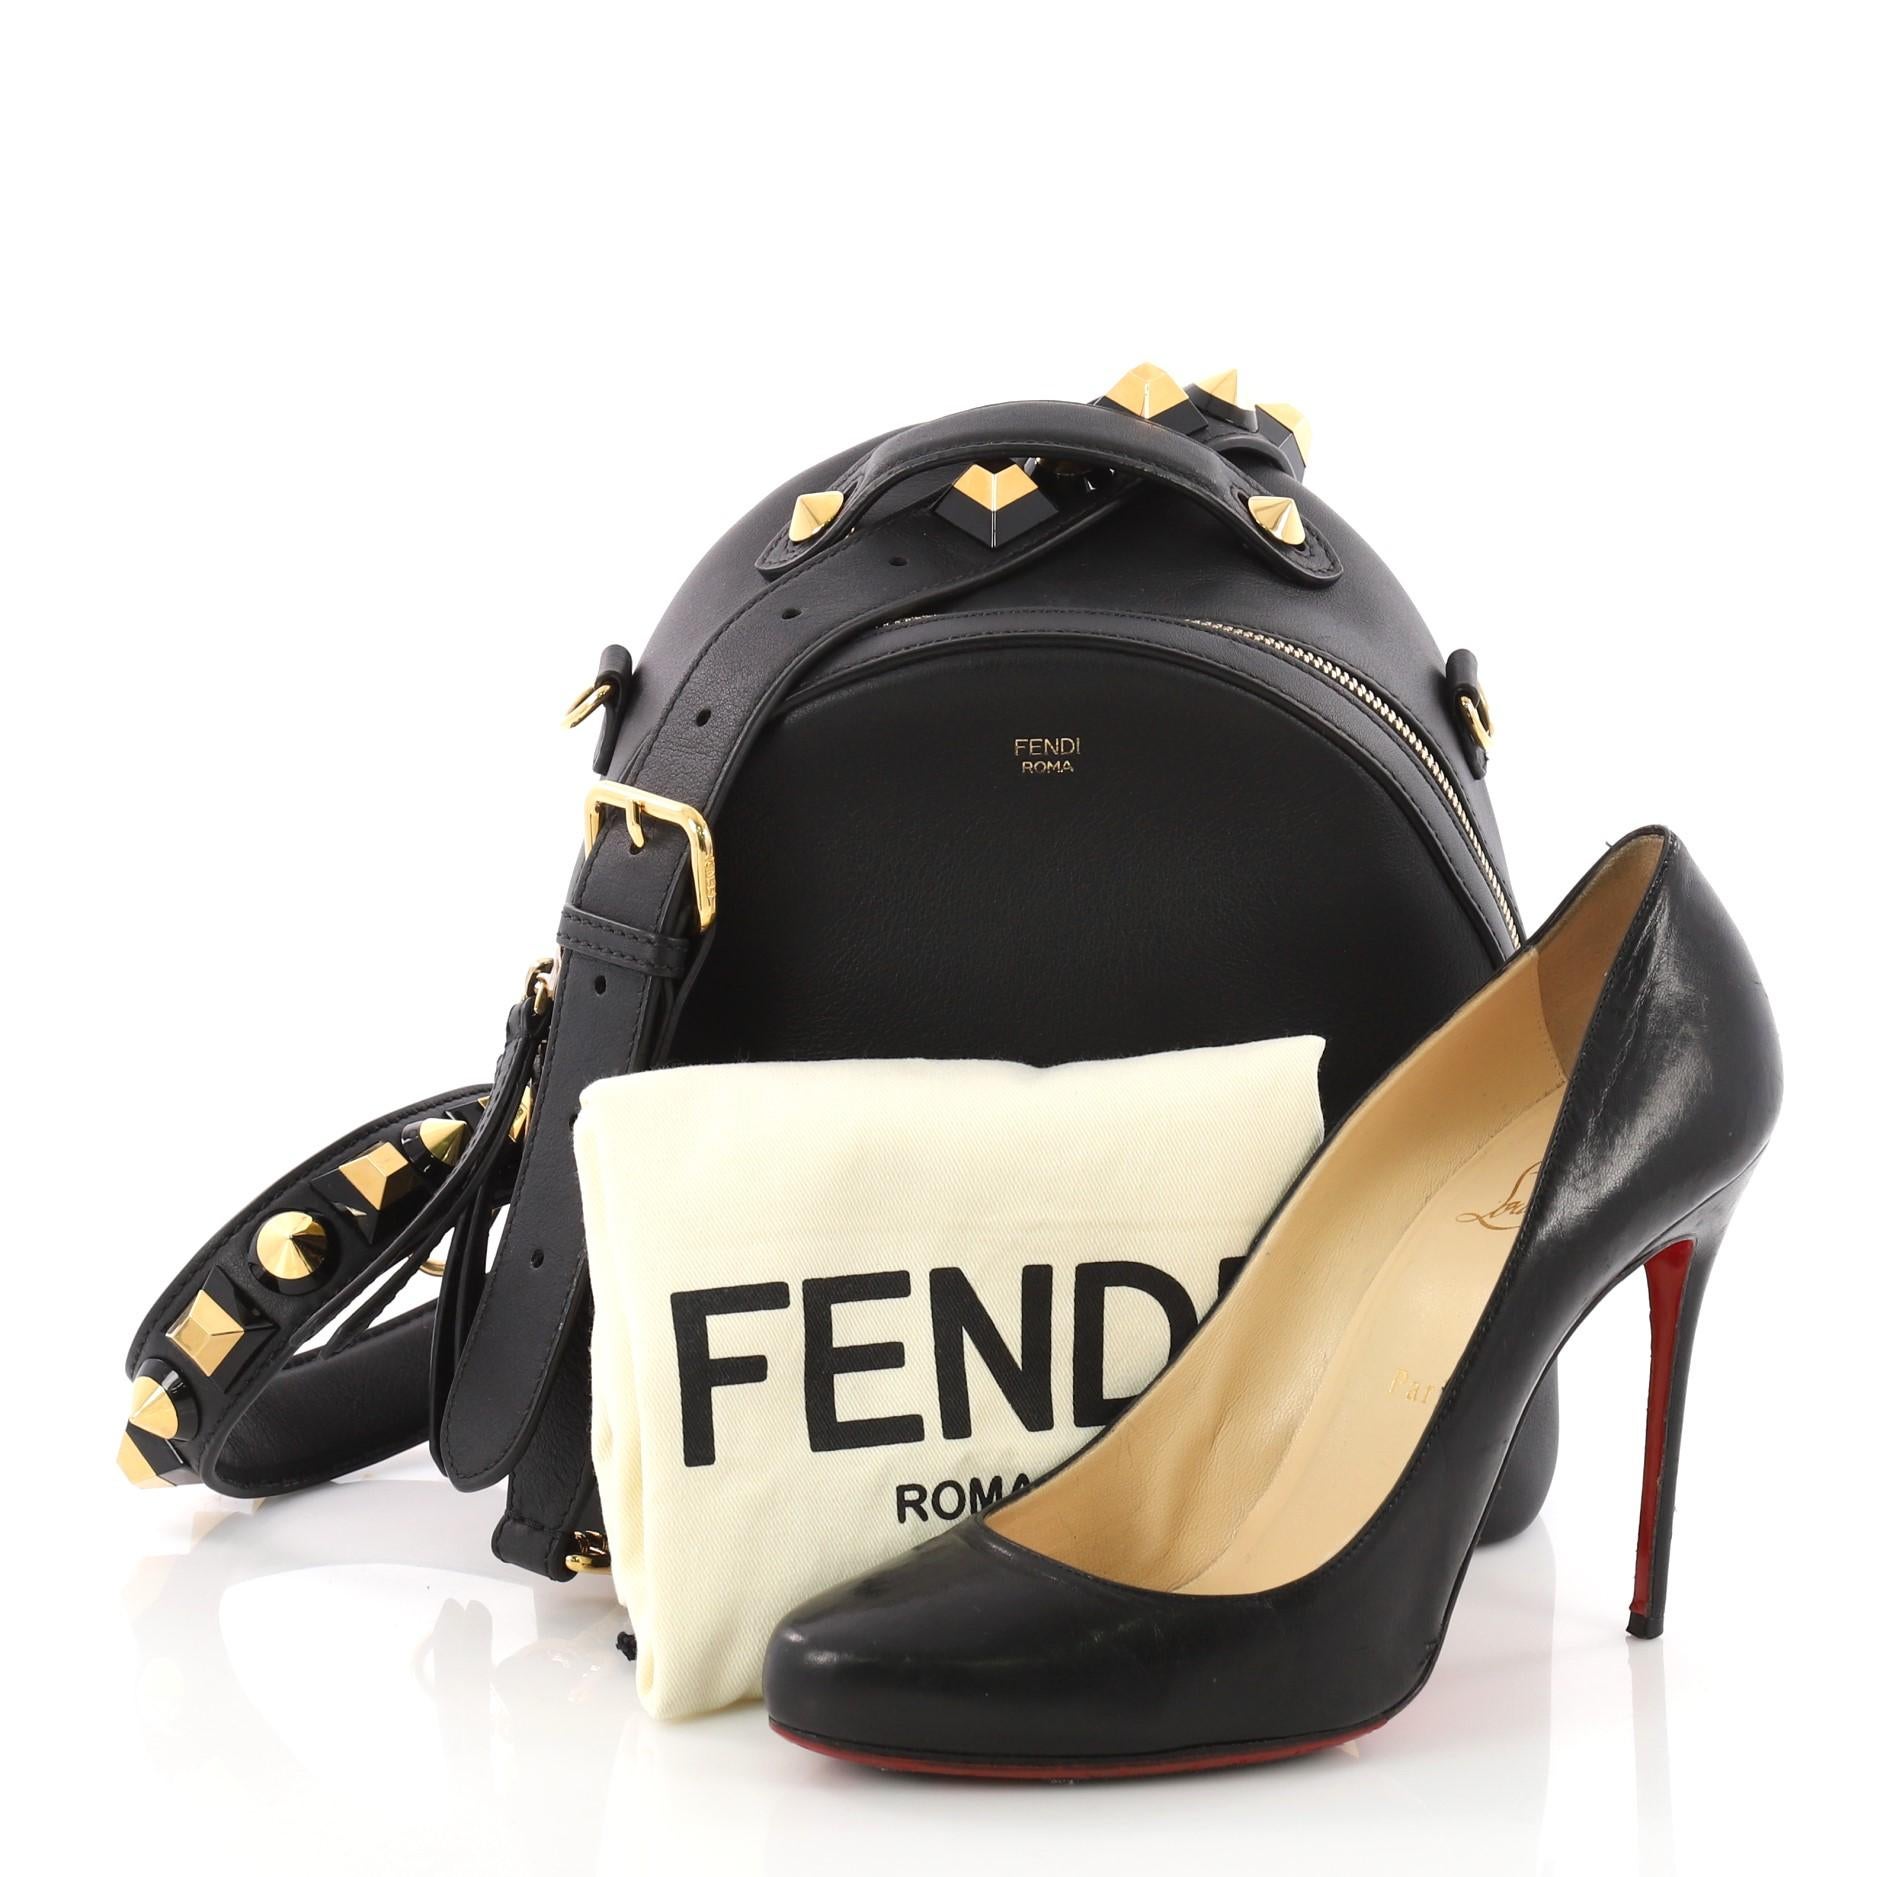 This authentic Fendi By The Way Backpack Crossbody Studded Leather Mini balances a luxurious, playful style made for on-the-go fashionistas. Crafted in black leather, this bag features oversize gold studs, leather top handle, detachable studded